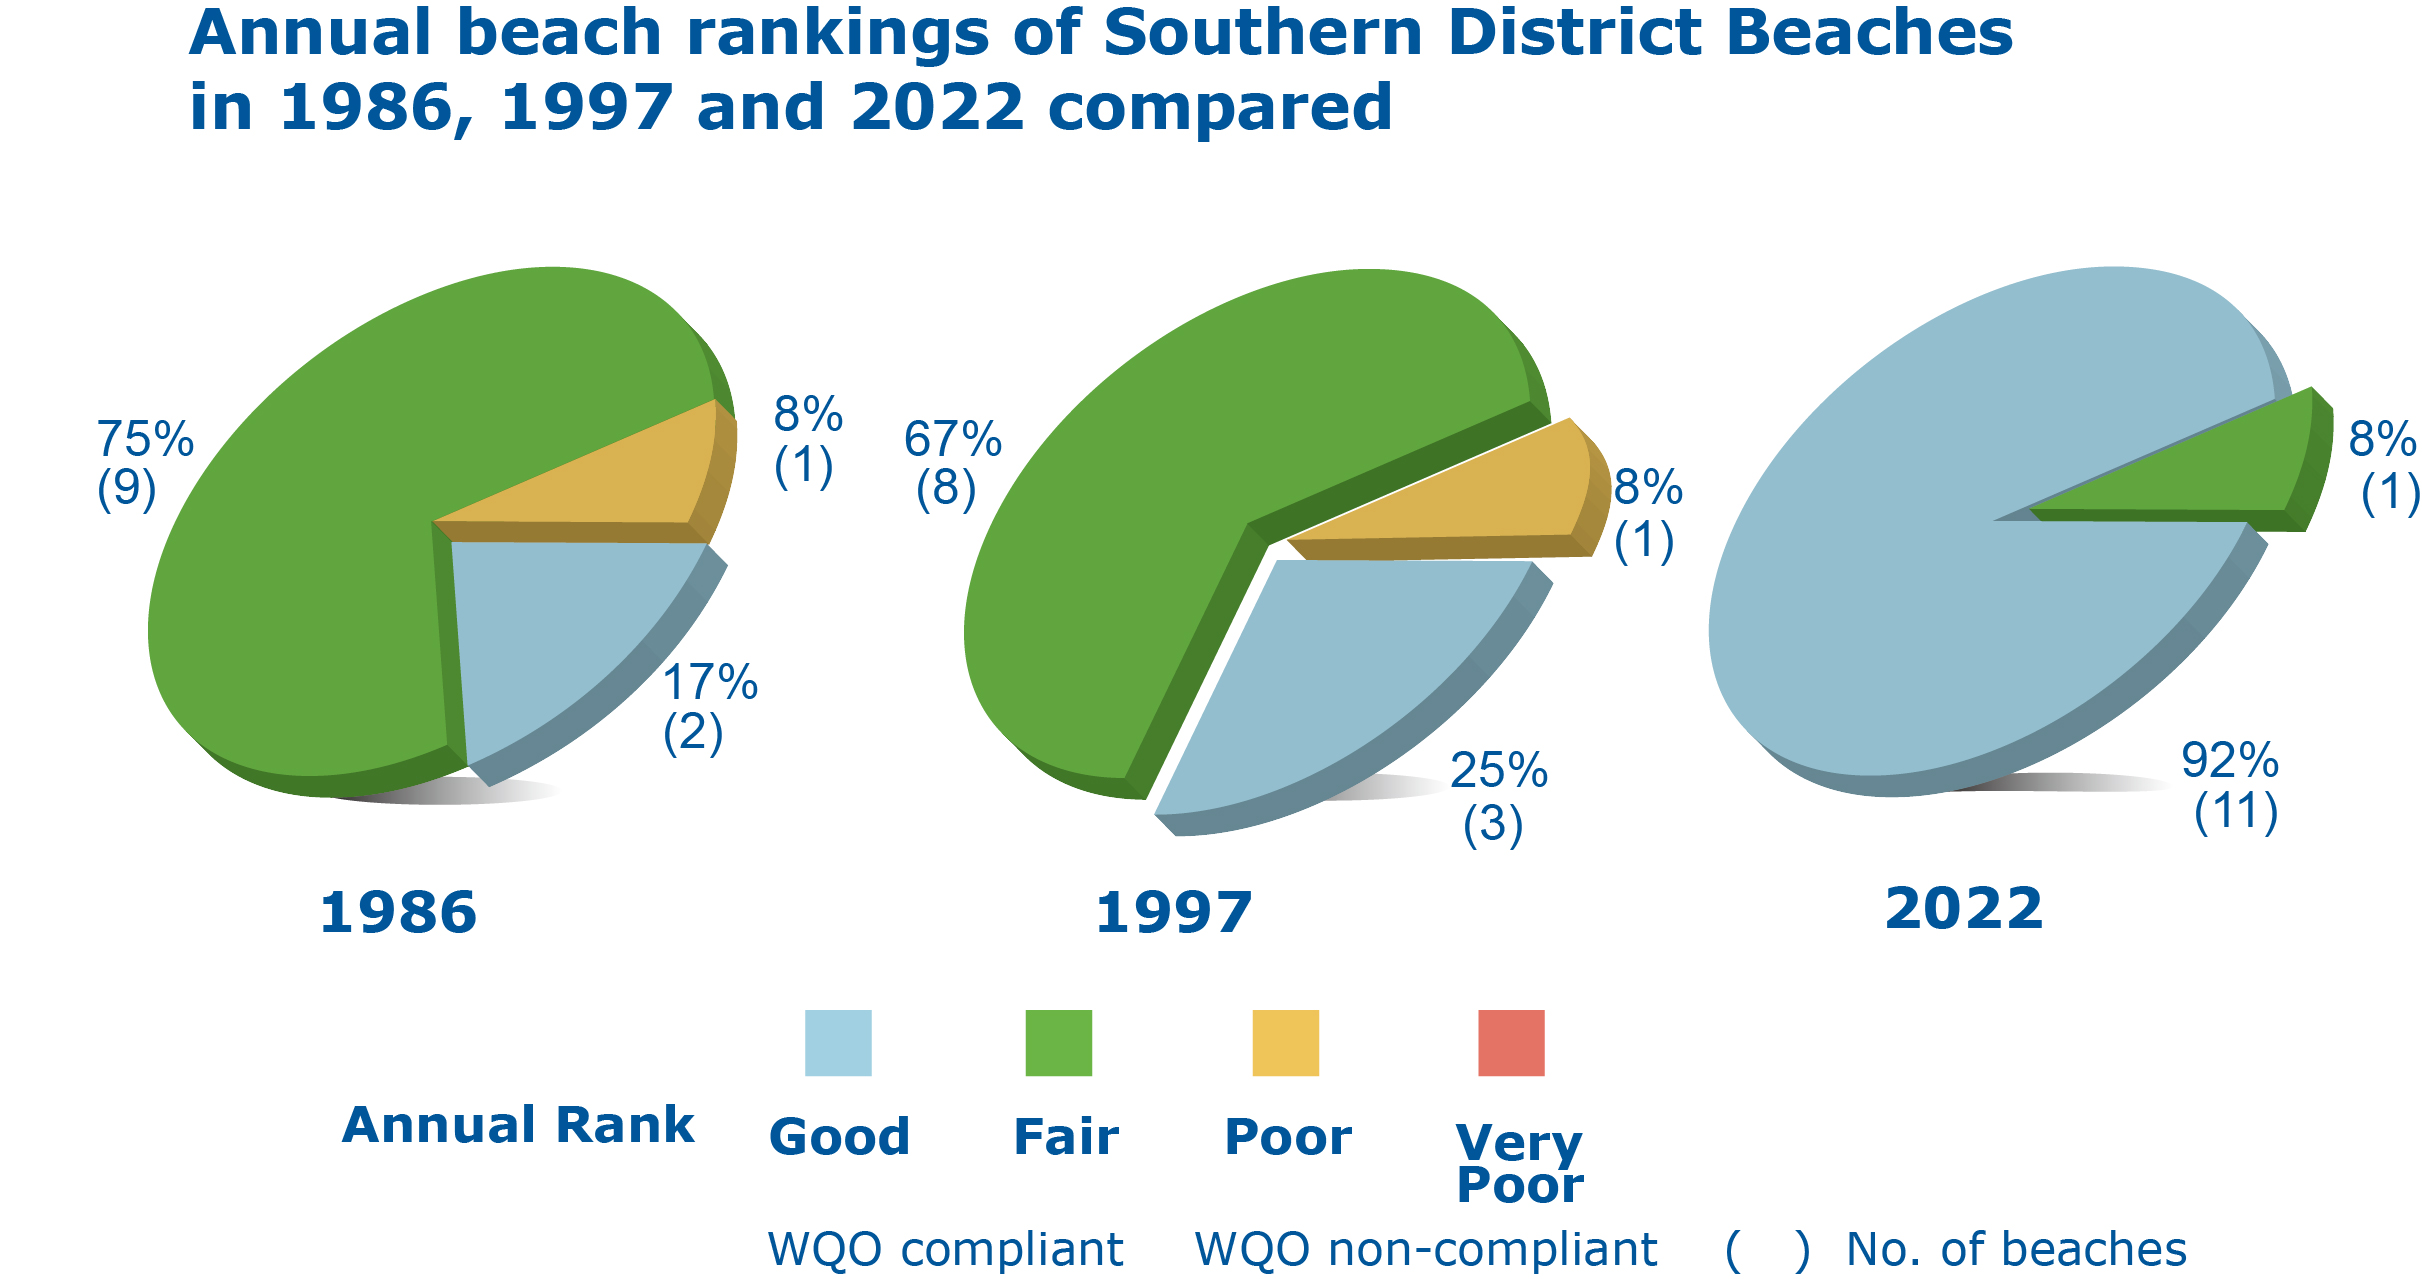 Annual beach rankings of Southern District Beaches